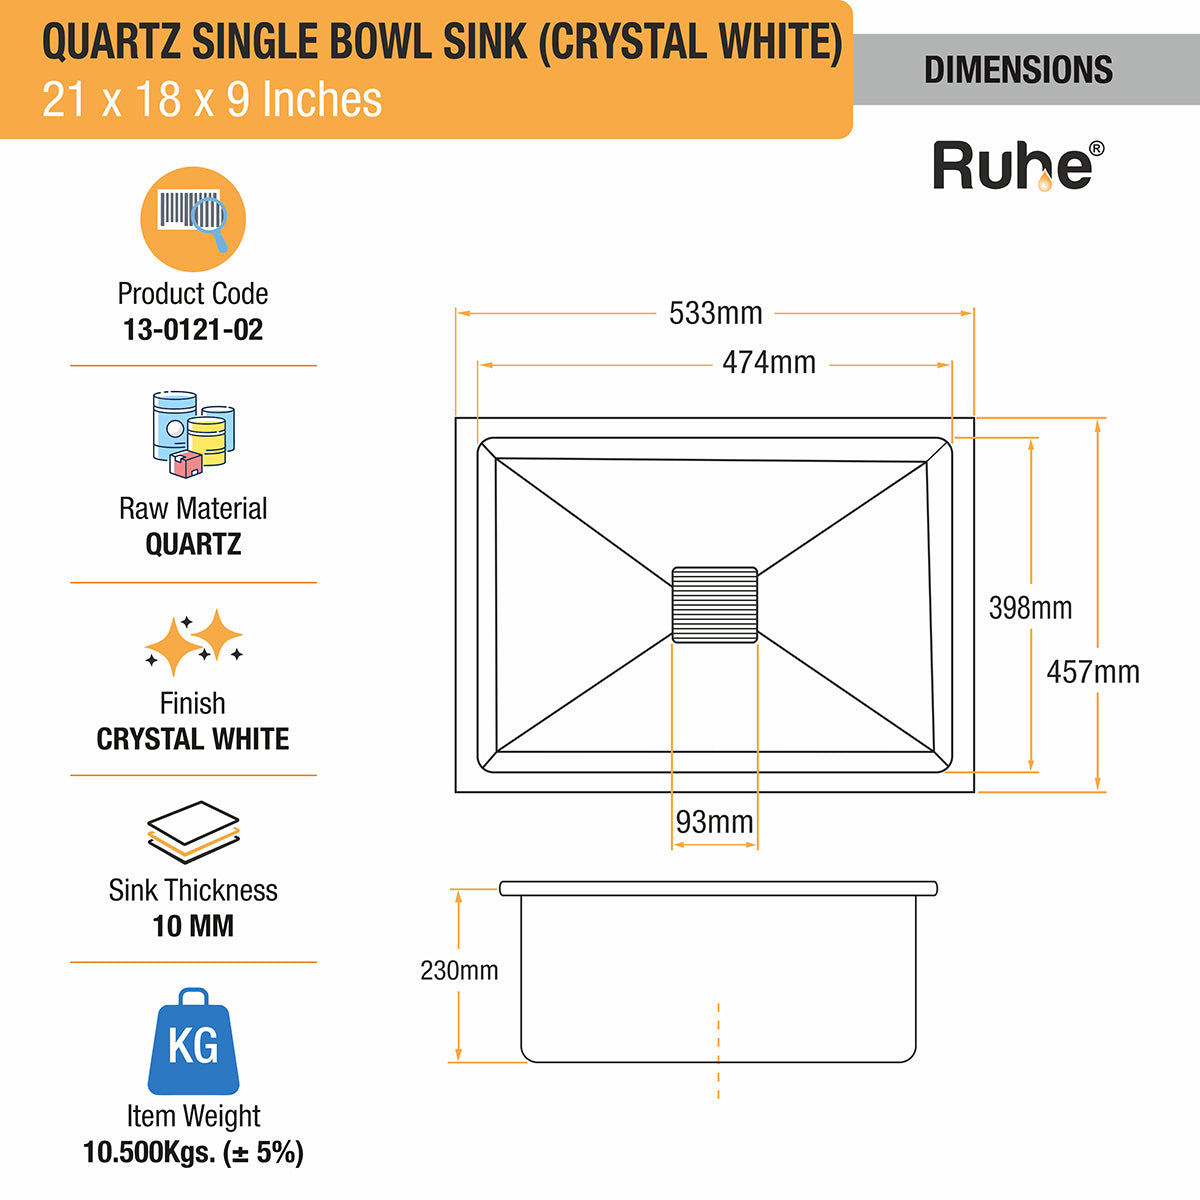 Quartz Crystal White Single Bowl Kitchen Sink (21 x 18 x 9 inches) dimensions and sizes